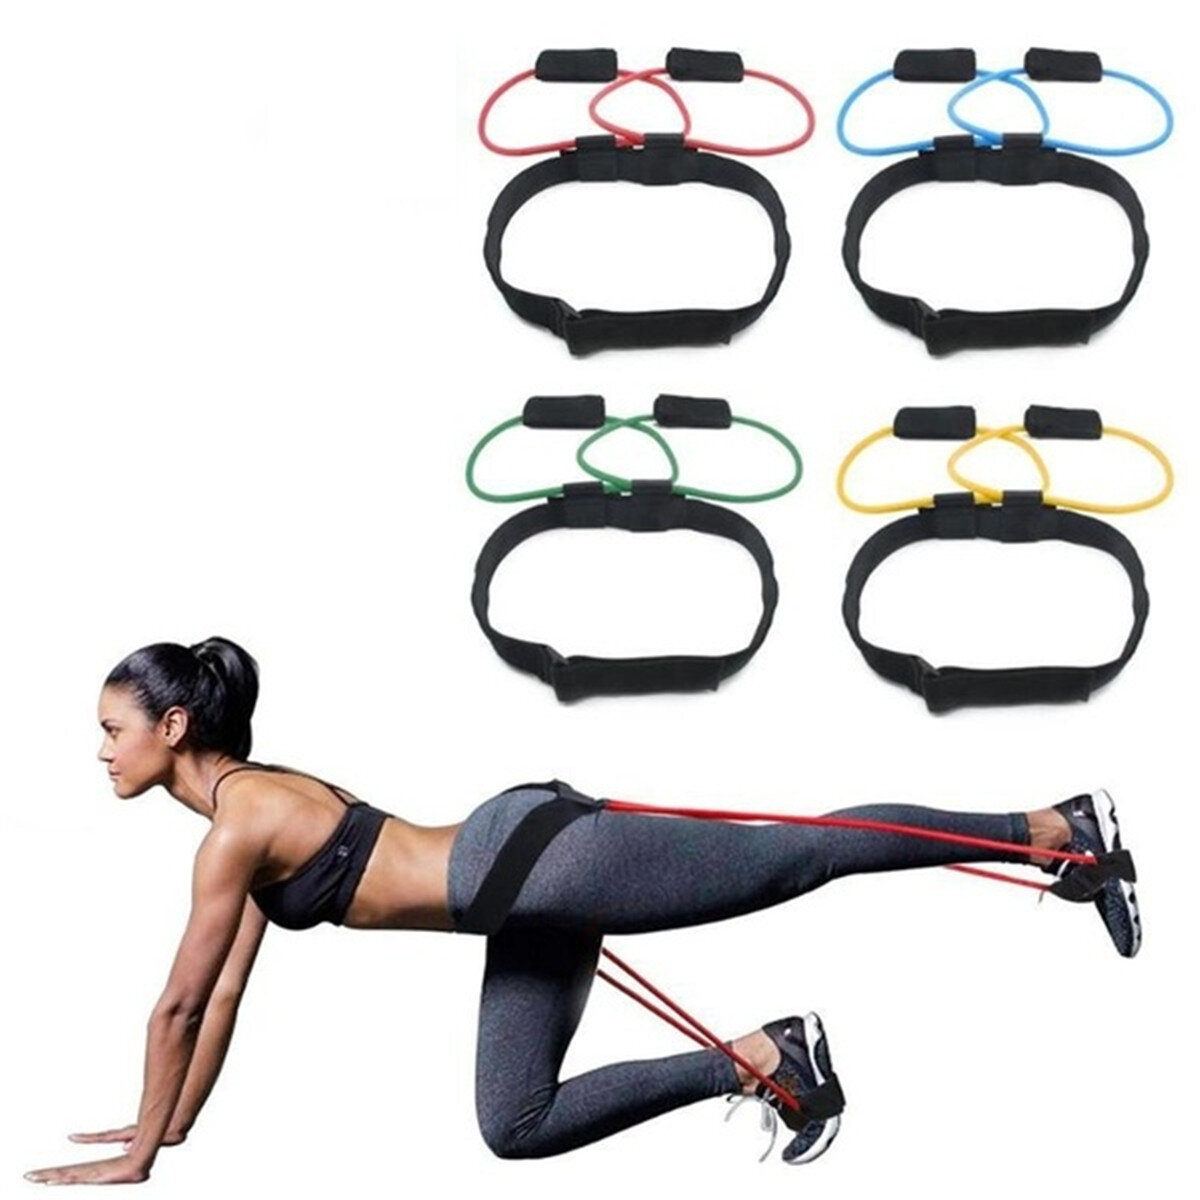 15-35lb Adjustable Fitness Resistance Bands Elastic Band Butt Legs Muscle Training Band